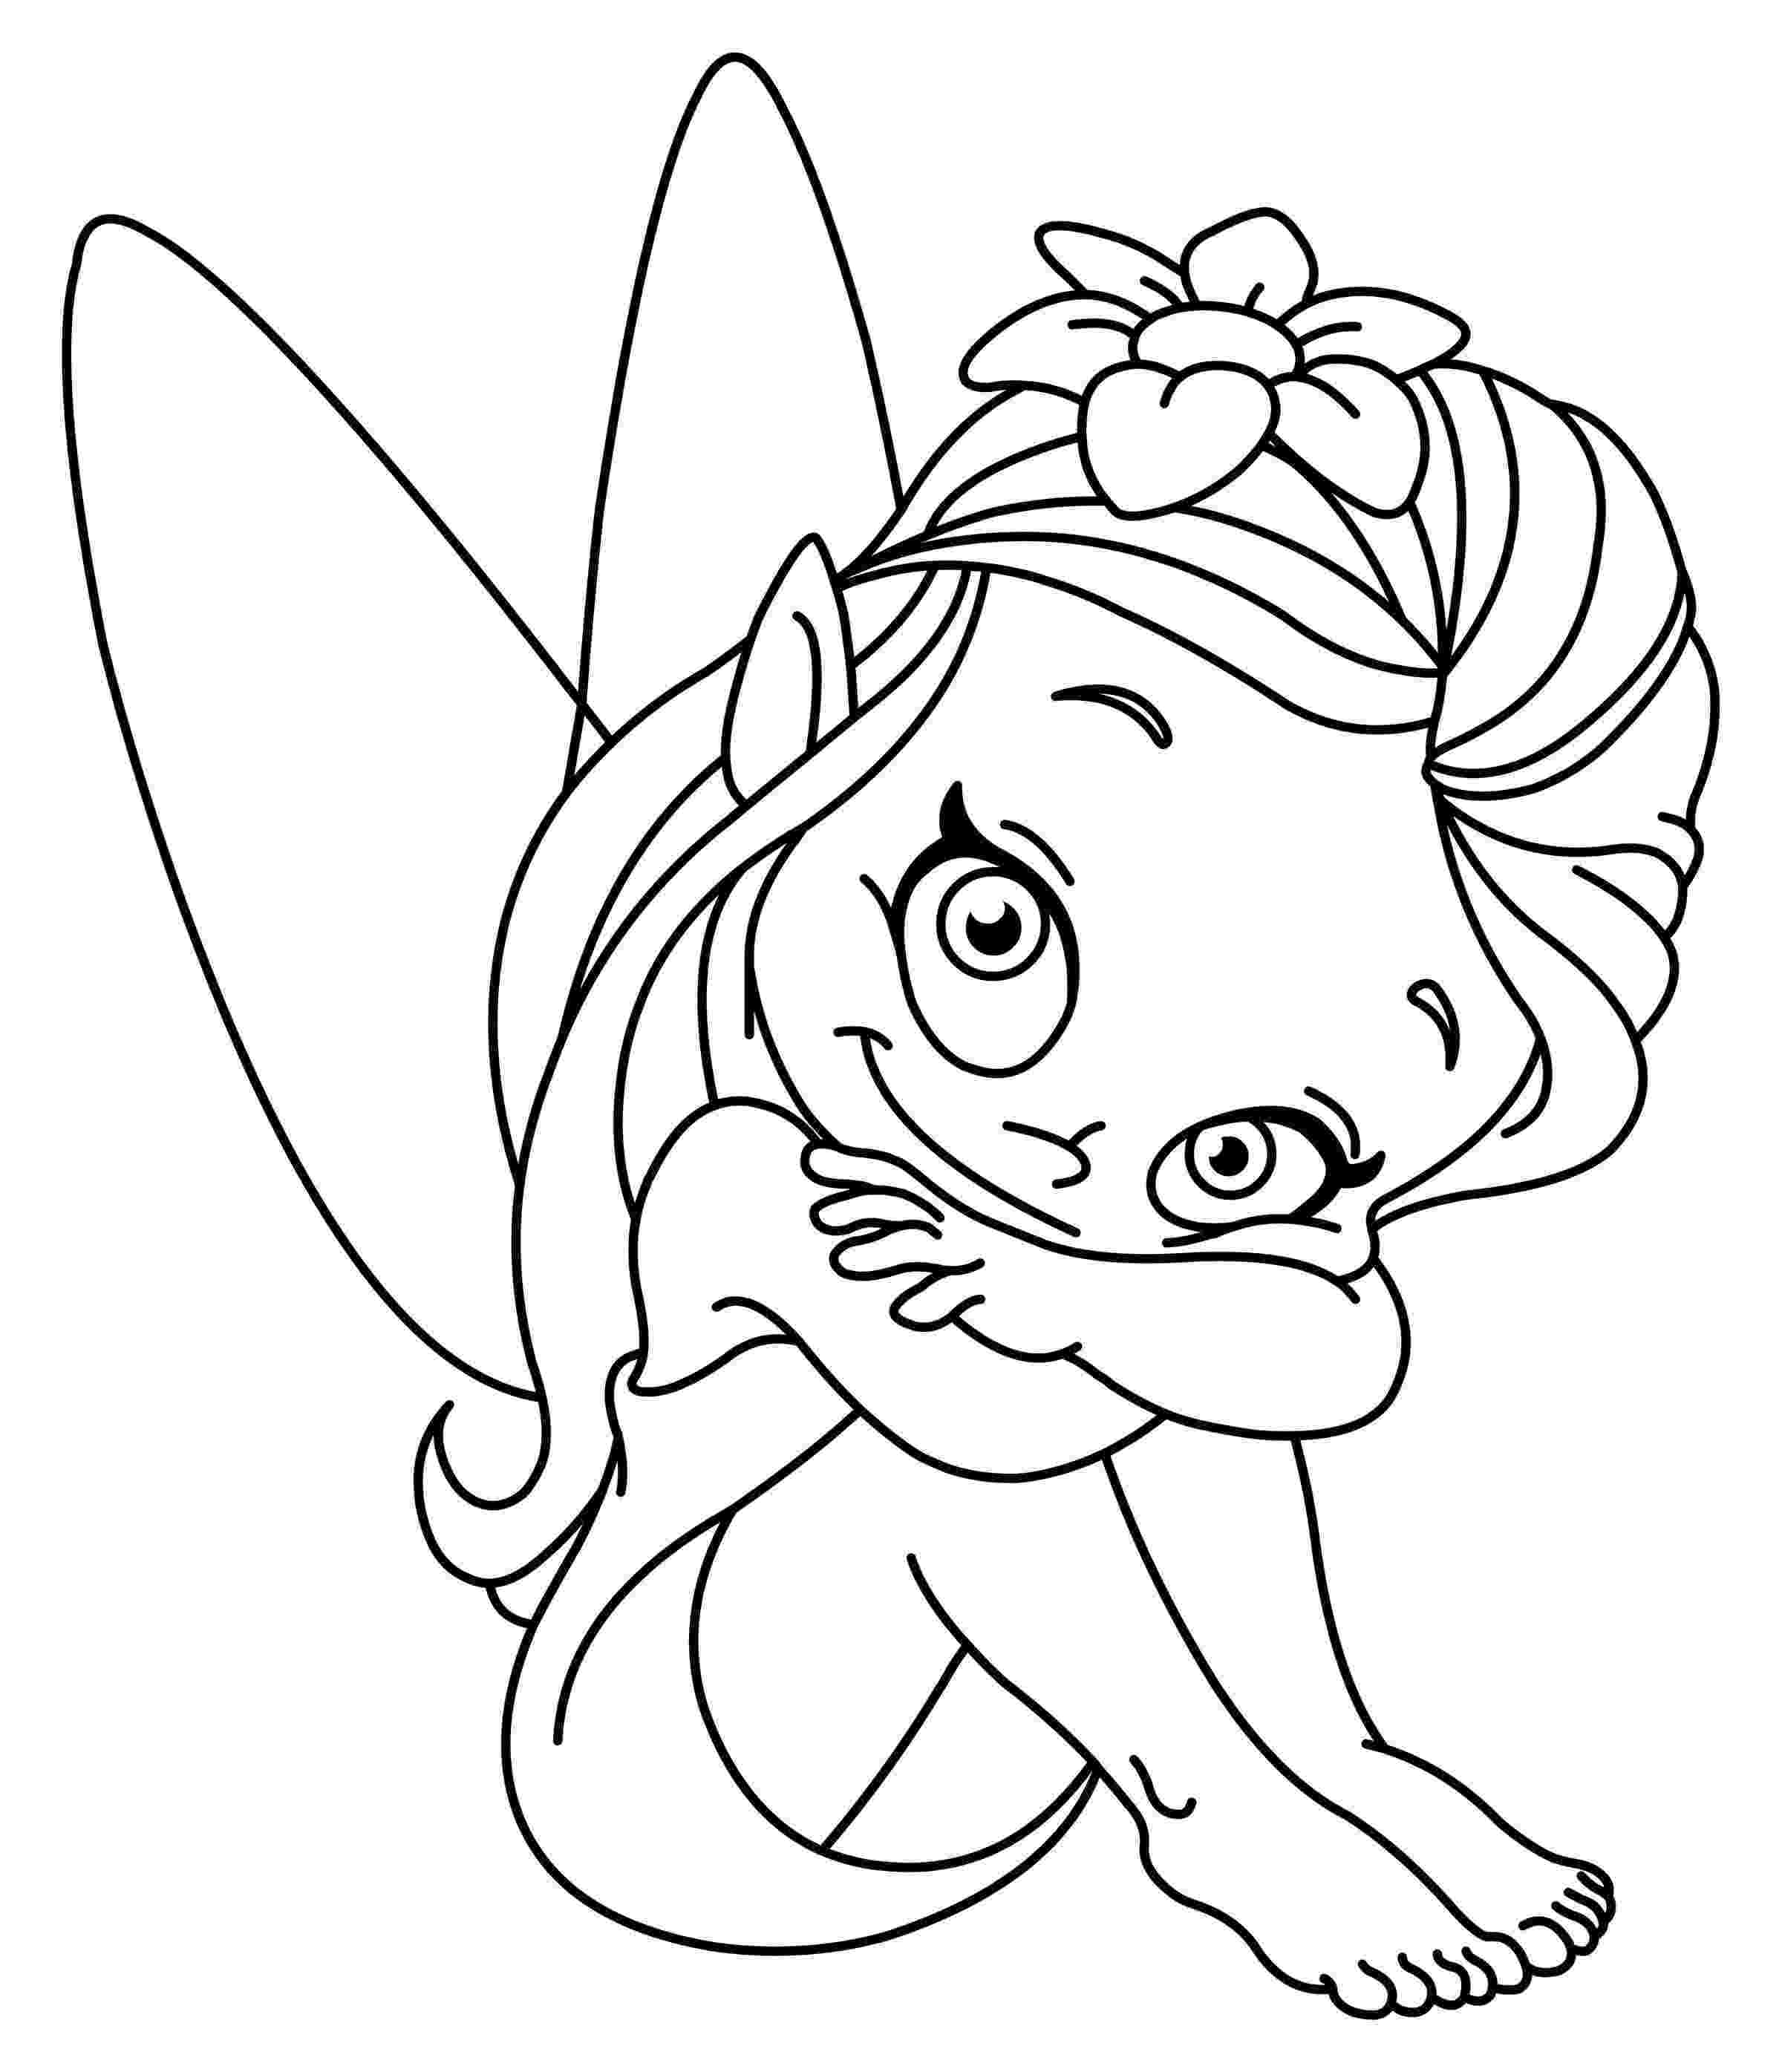 free colouring pages for girls coloring pages for girls best coloring pages for kids colouring pages girls free for 